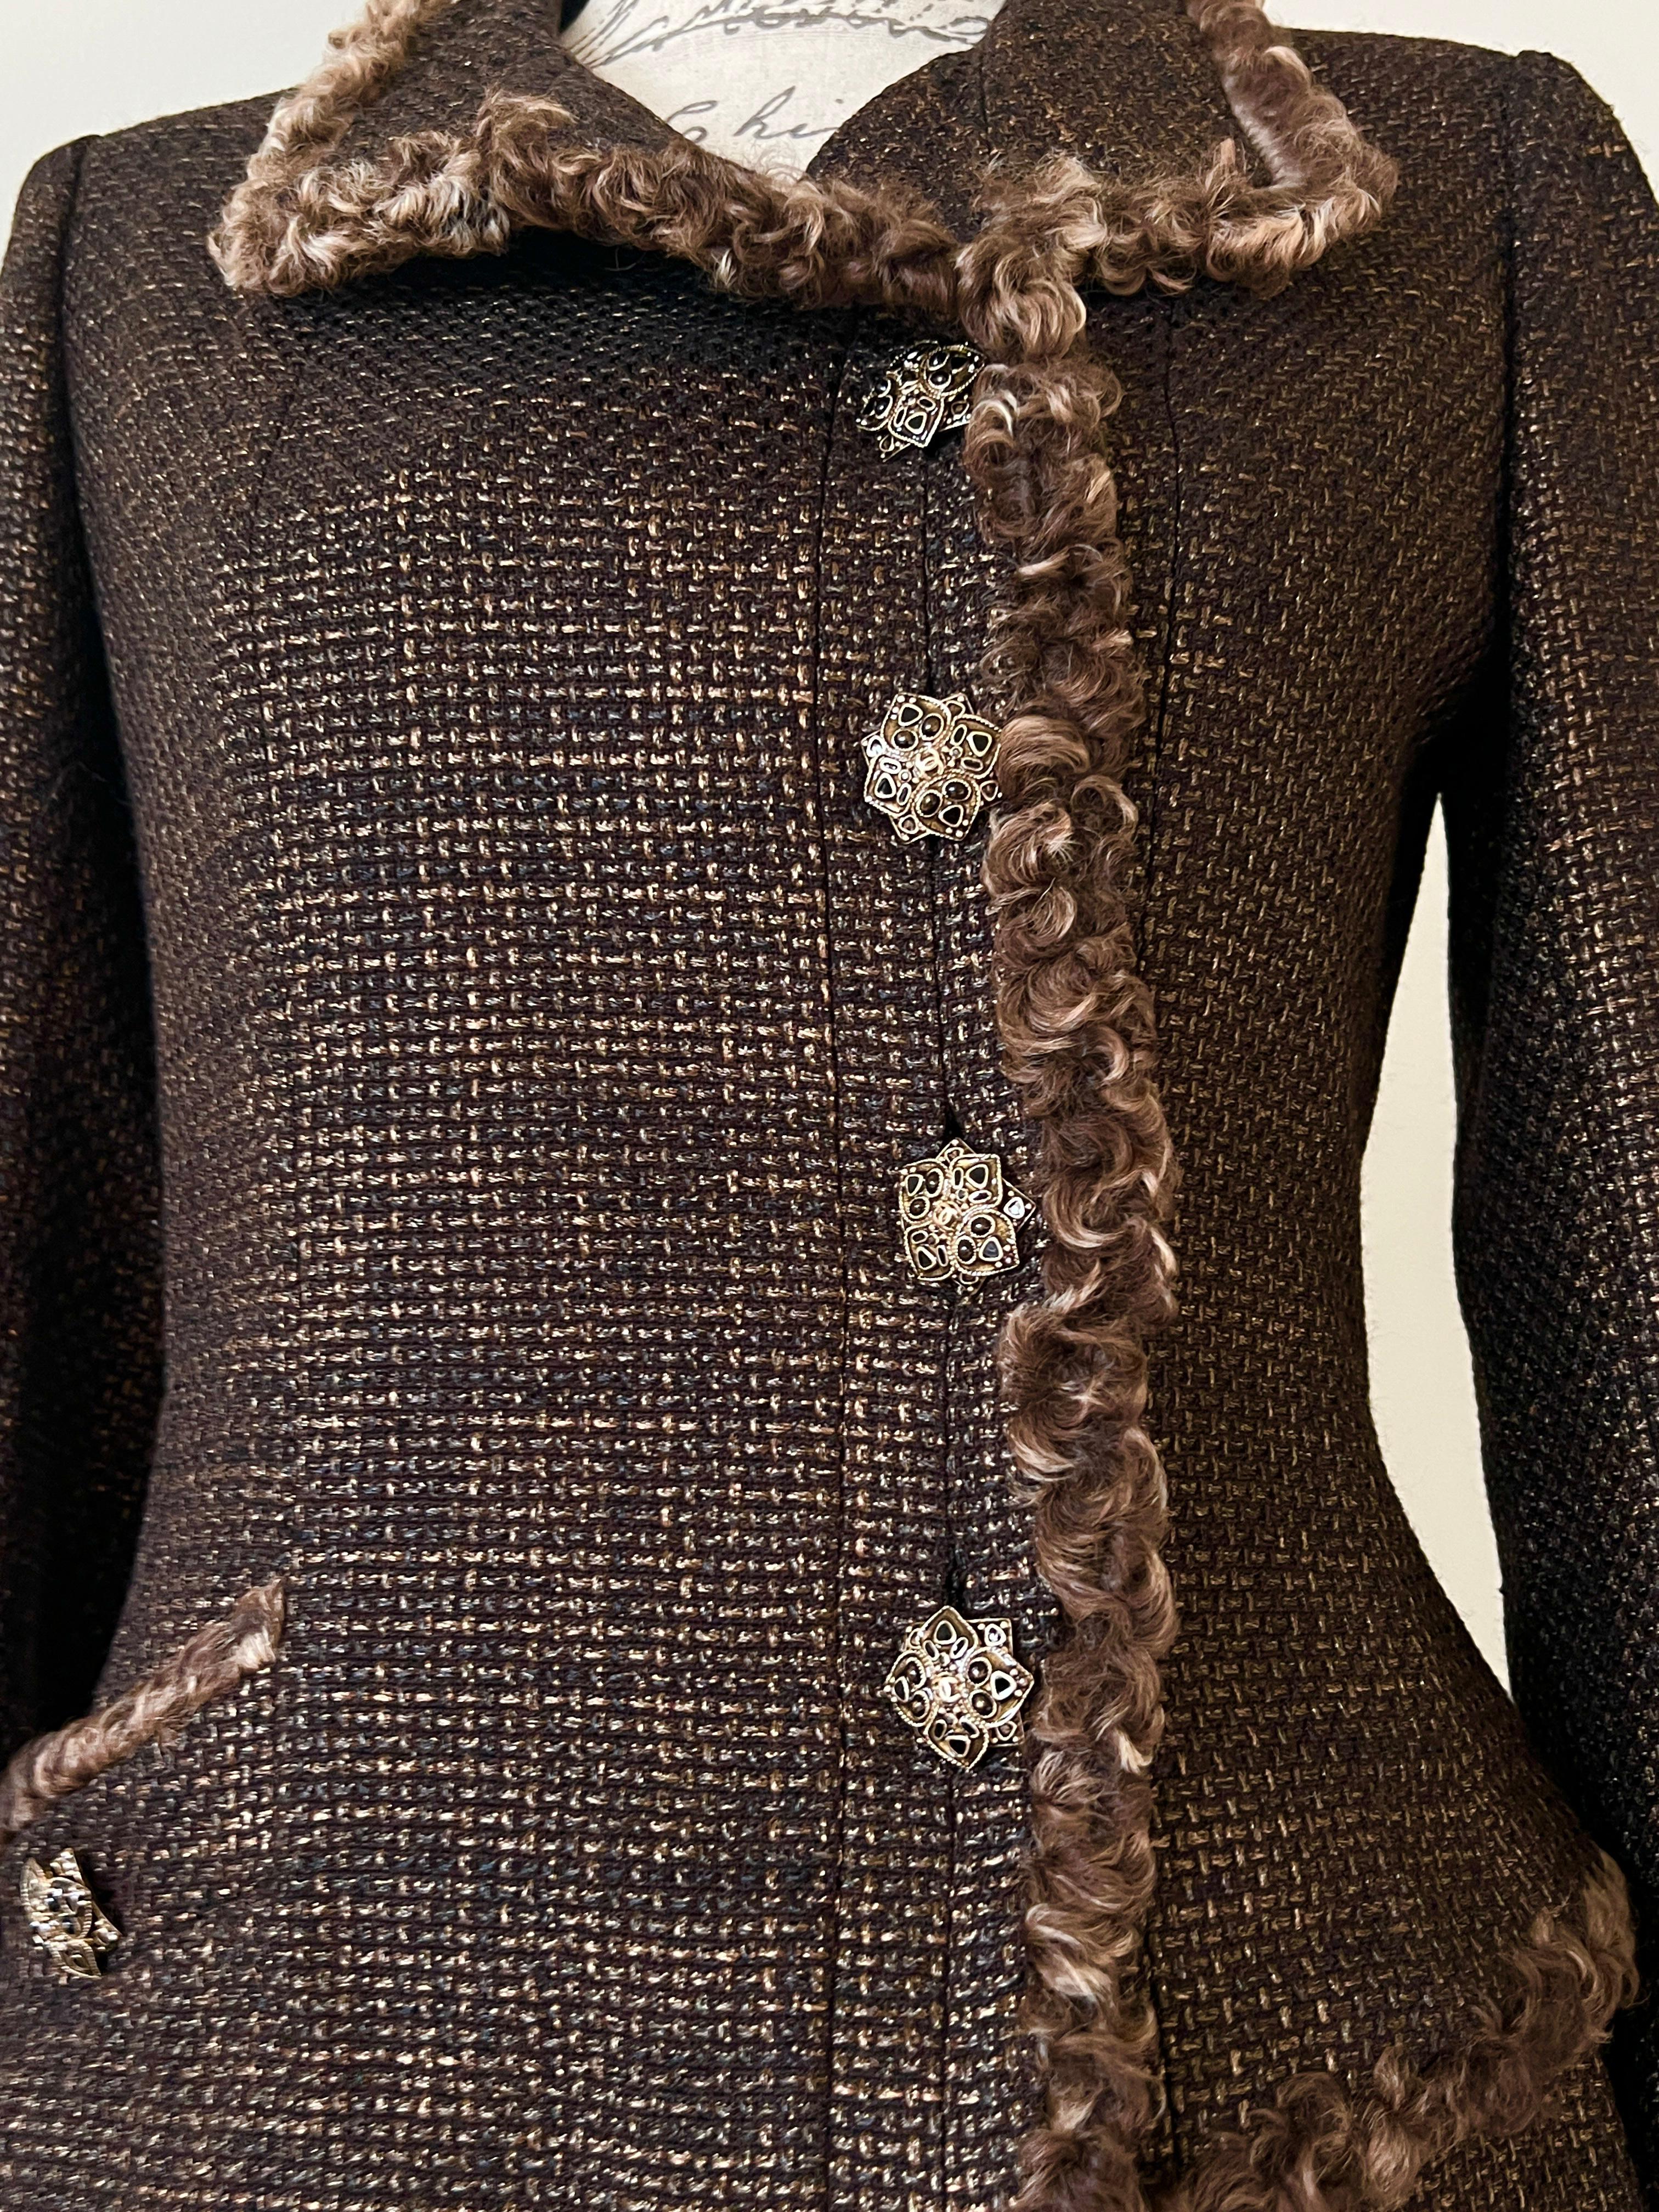 Extremely rare Chanel chocolate brown tweed suit - jacket and skirt- from 2009 Pre-Fall Metiers d'Art Collection by Mr Karl Lagerfeld
- stunning CC logo jewel Gripoix buttons
- precious lesage tweed with intricate bronze shimmer
- CC logo charm at